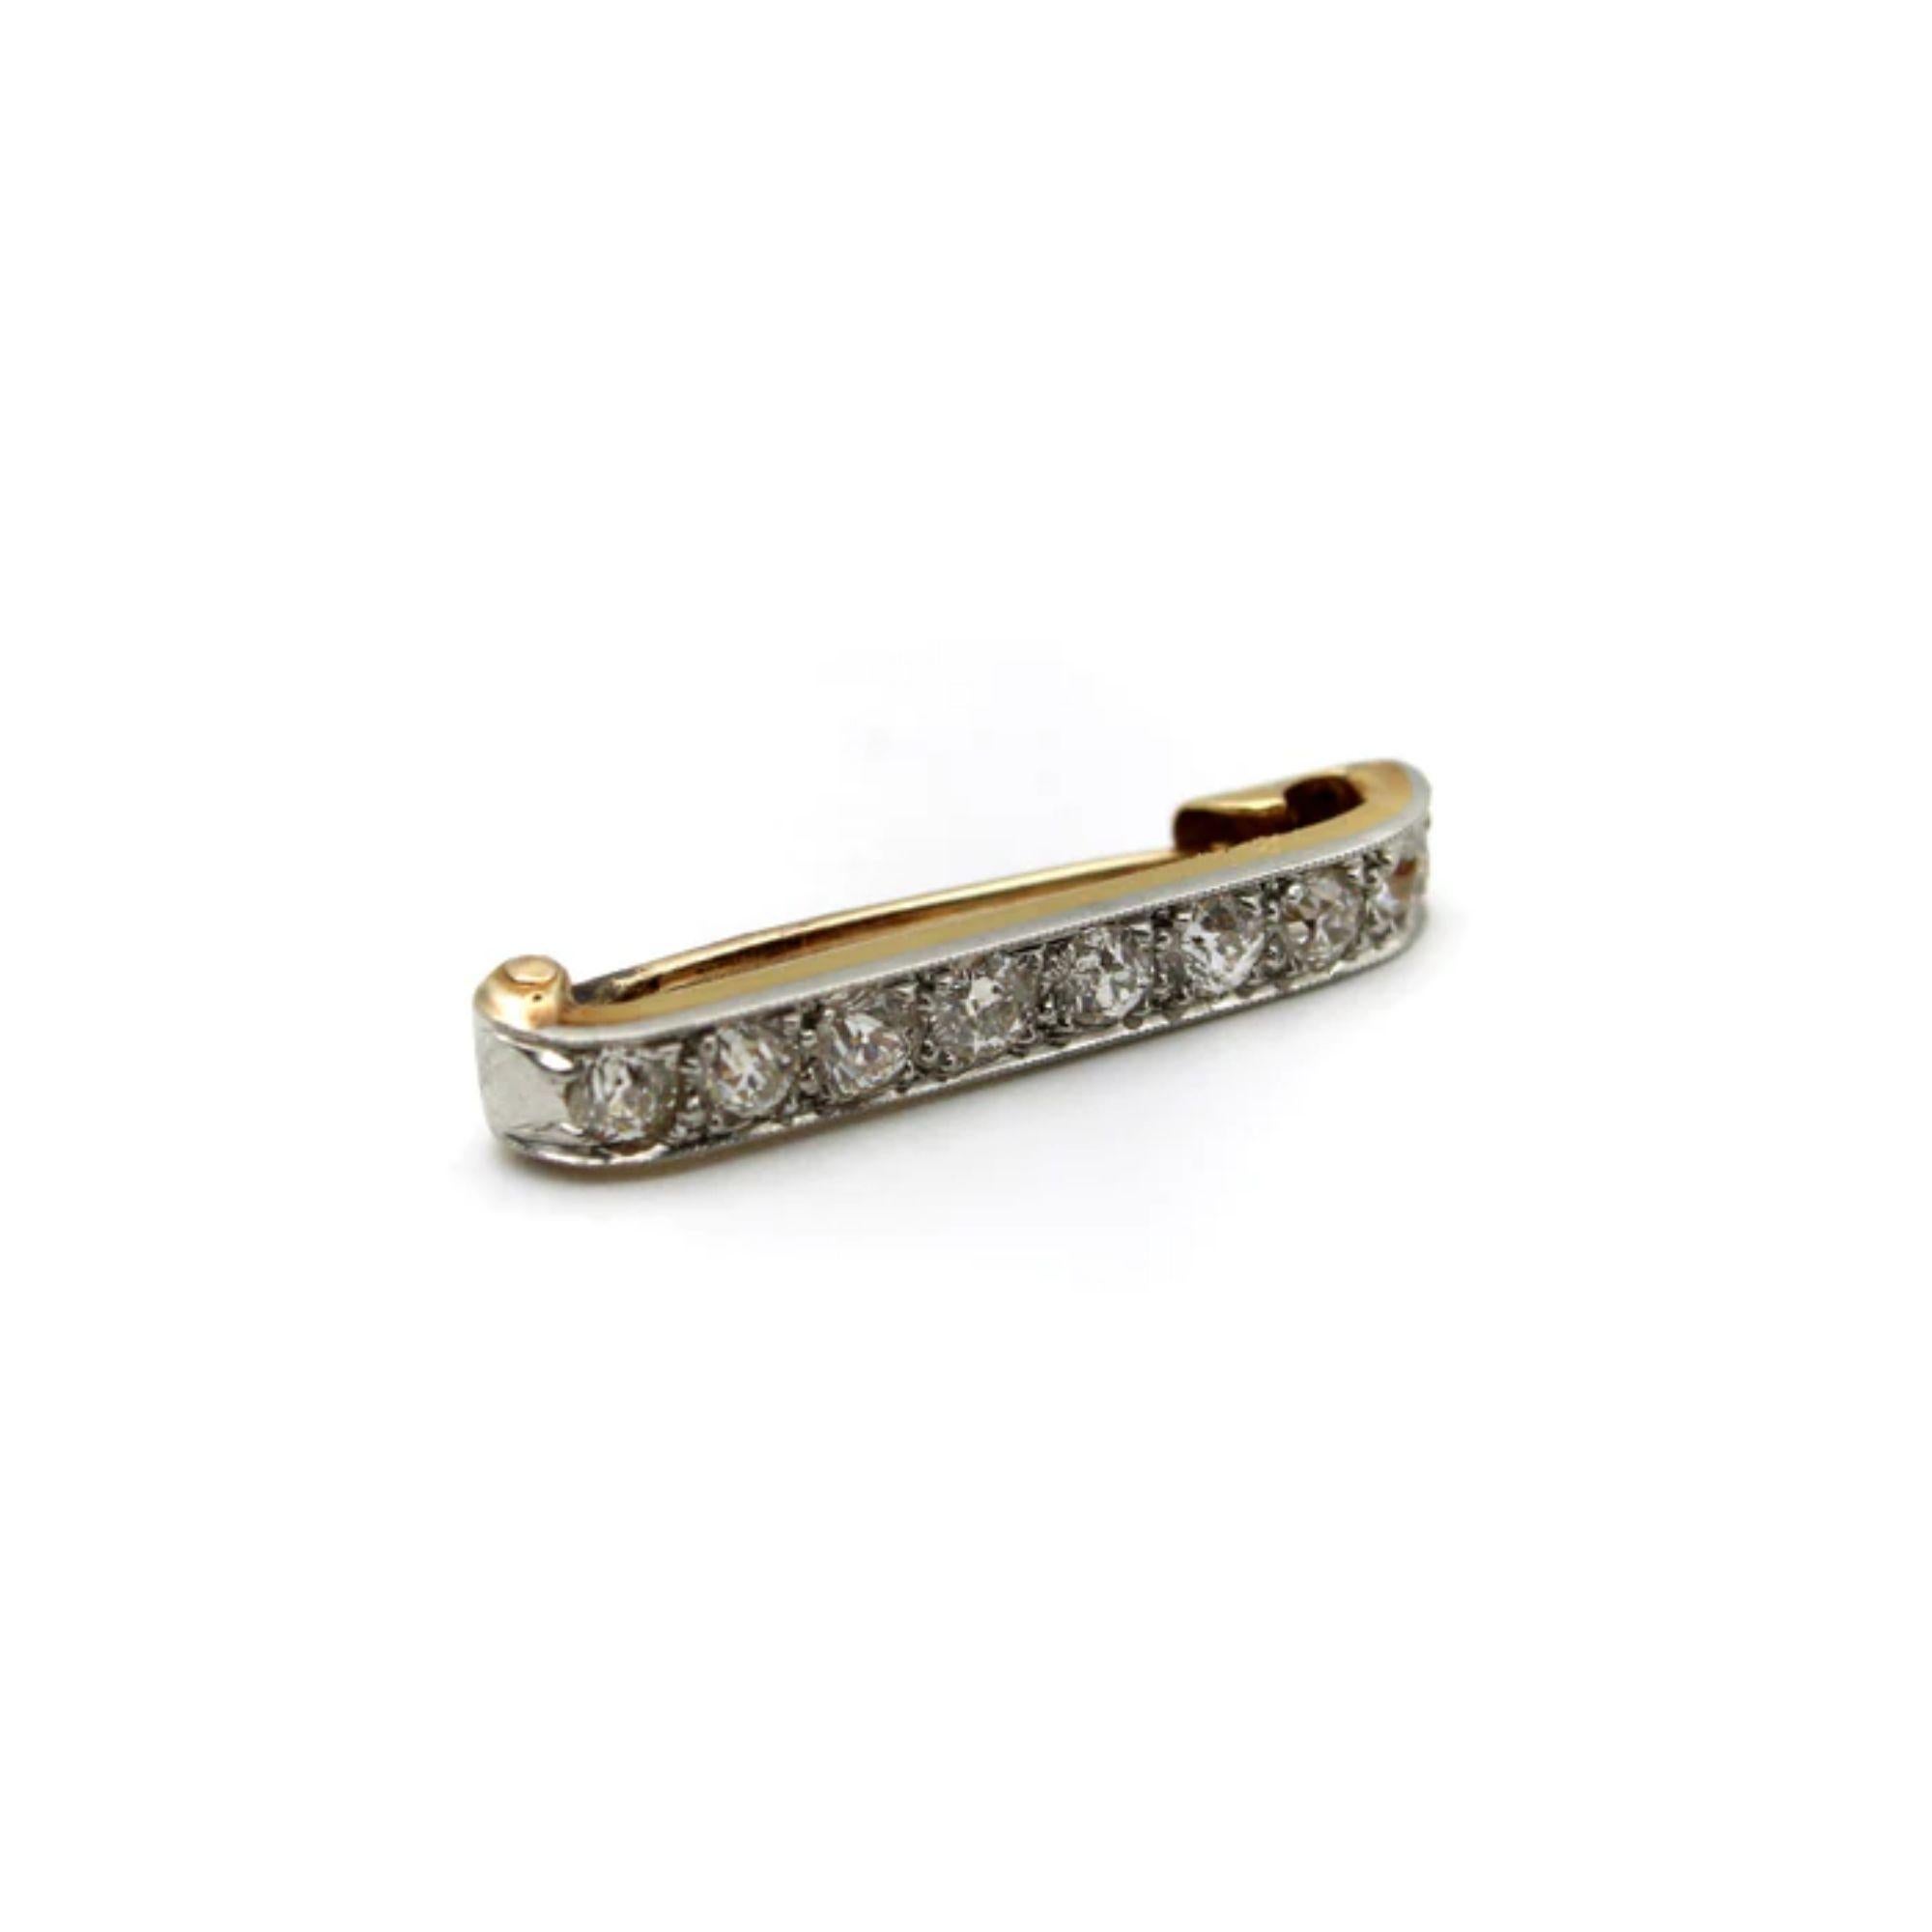 Edwardian 14K Gold Platinum Topped Old Mine Cut Diamond Bar Pin In Good Condition For Sale In Venice, CA